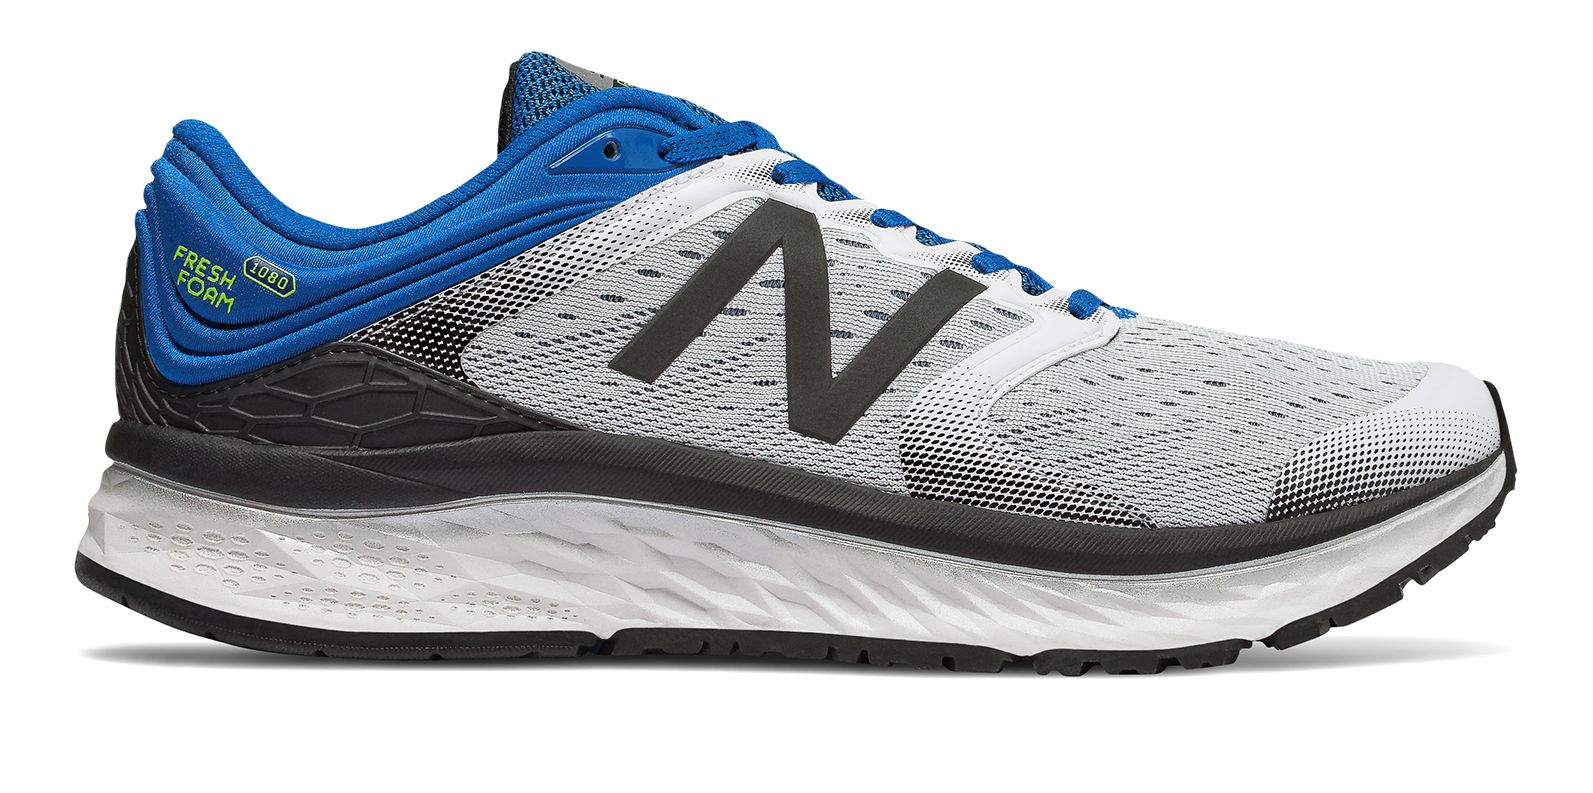 New Balance M1080-V8 on Sale - Discounts Up to 40% Off on M1080WW8 at Joe's  New Balance Outlet